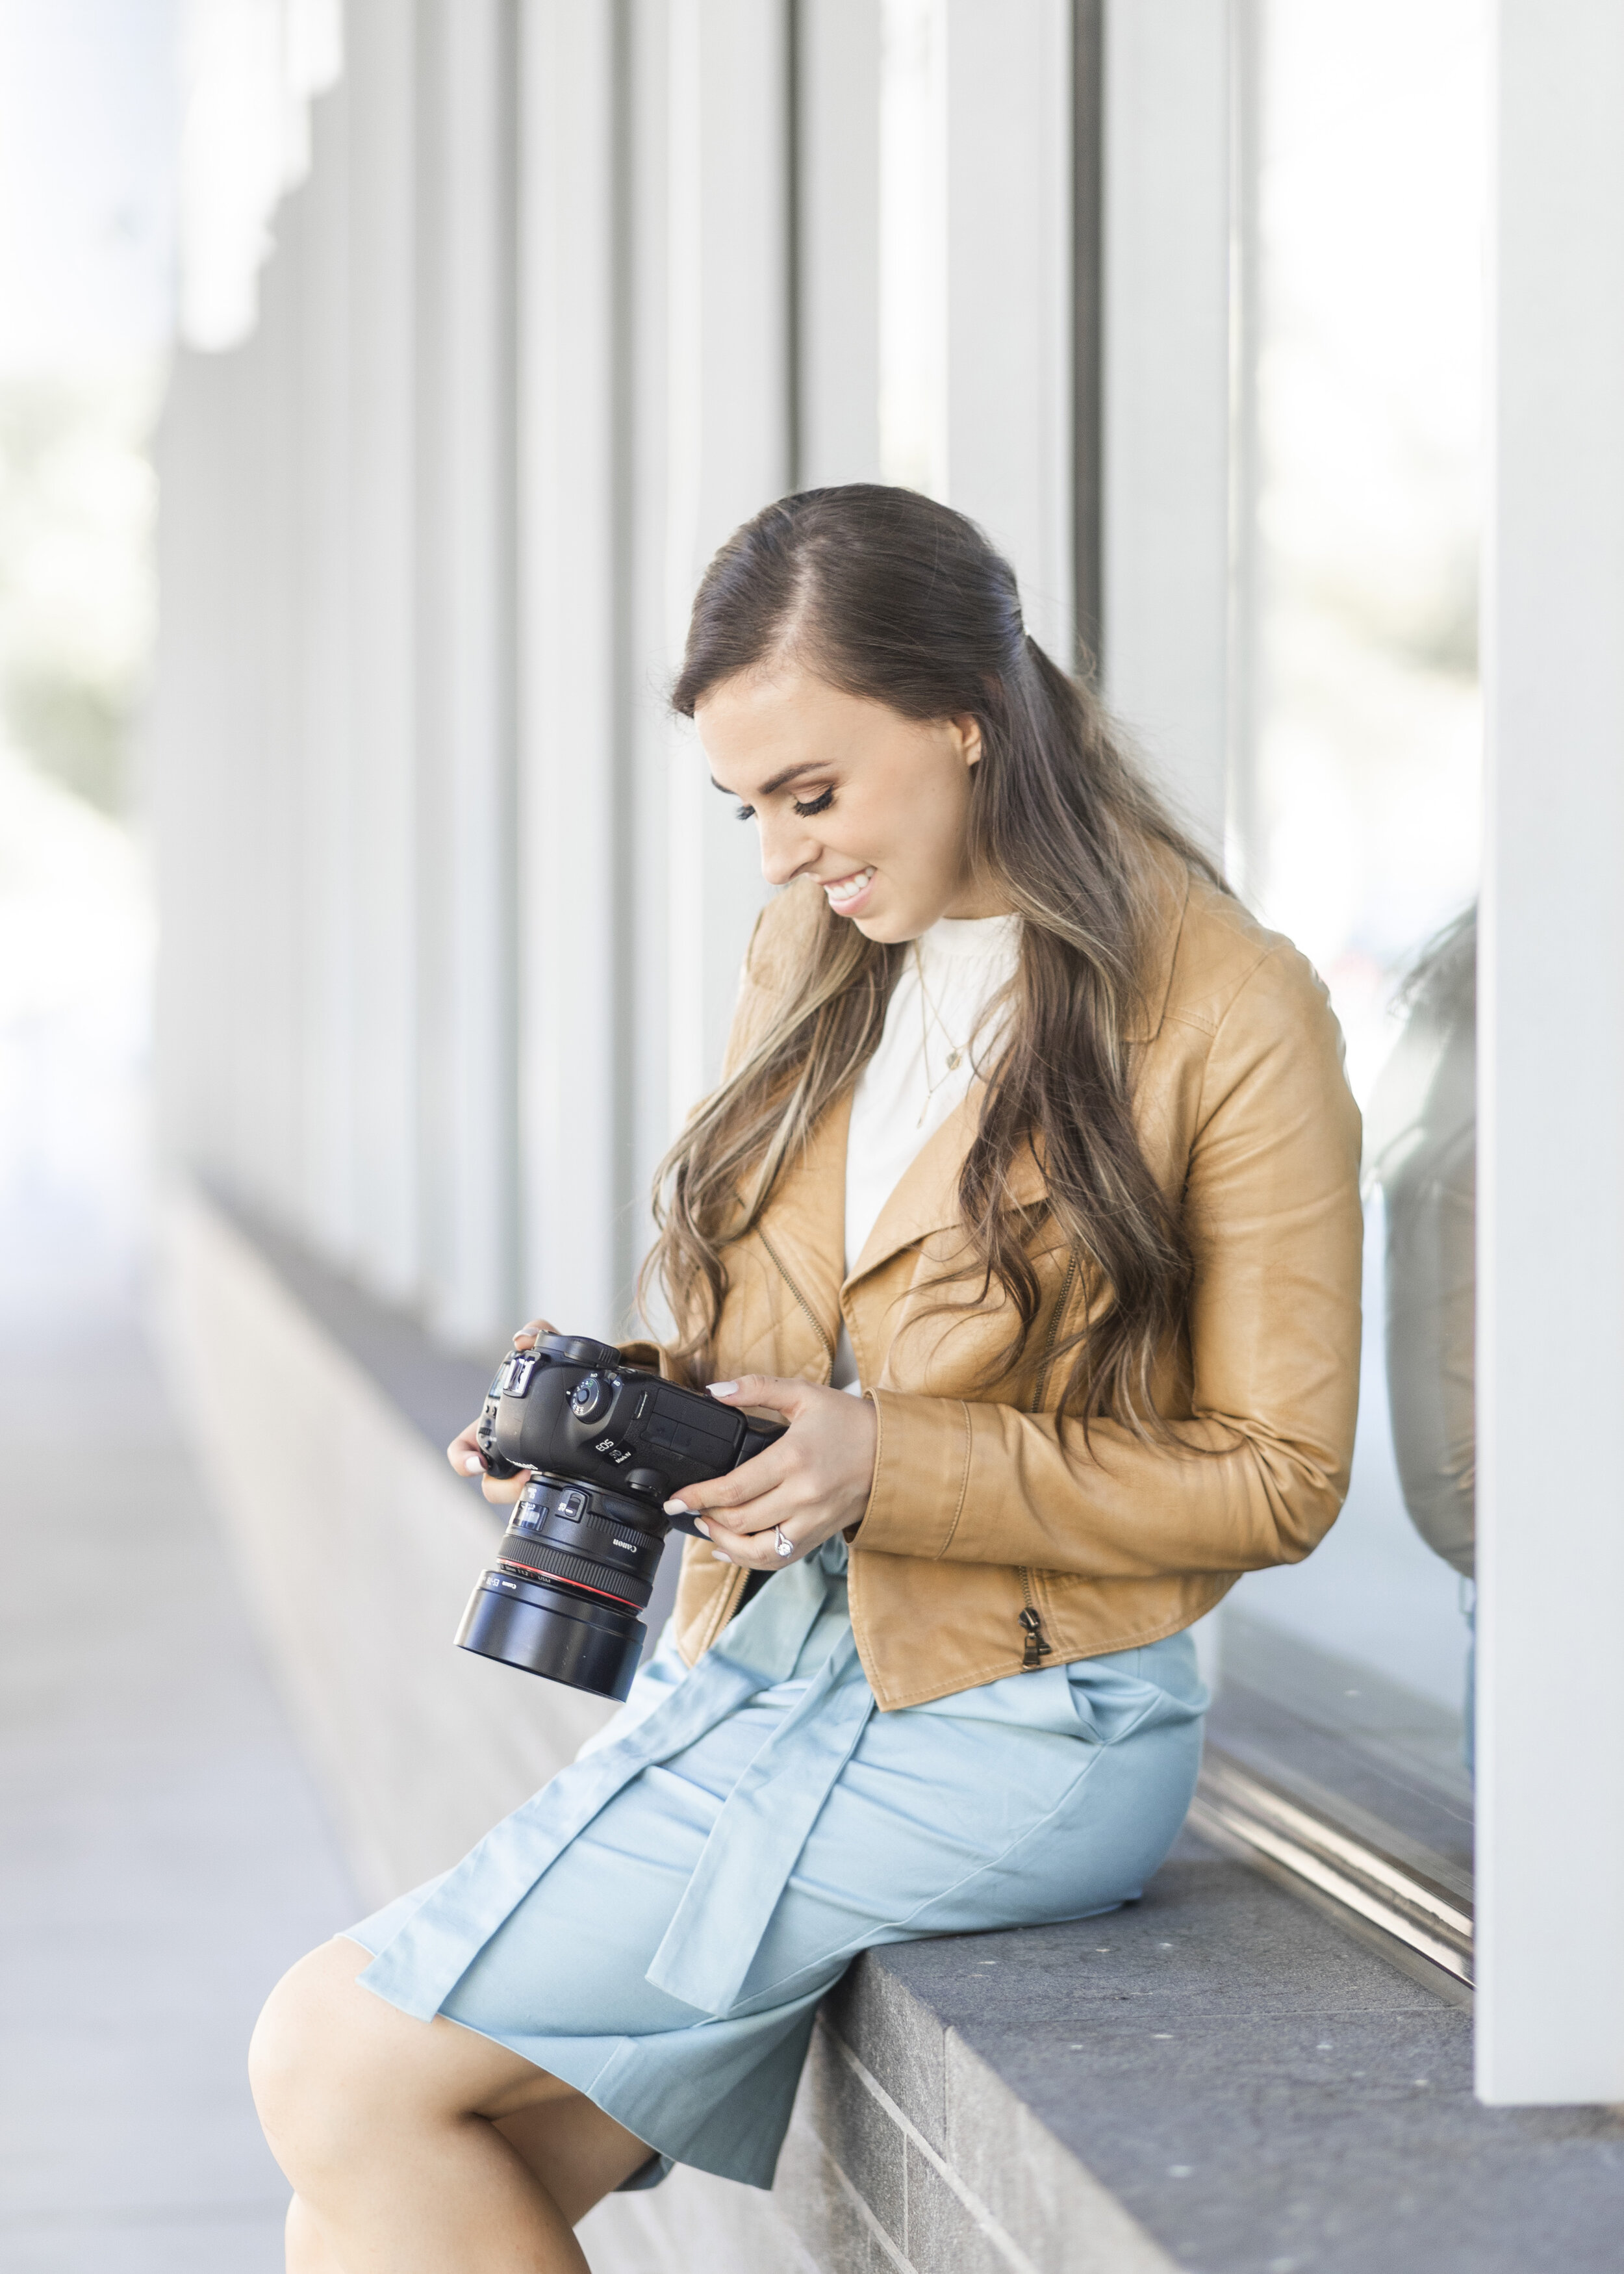  Savanna from Clarity Lane Photography poses for a branding photoshoot at Provo, Utah’s Brigham Young University. professional utah valley photographer, branding photoshoot, canon dslr camera, professional photography dslr camera, paperbag waisted de